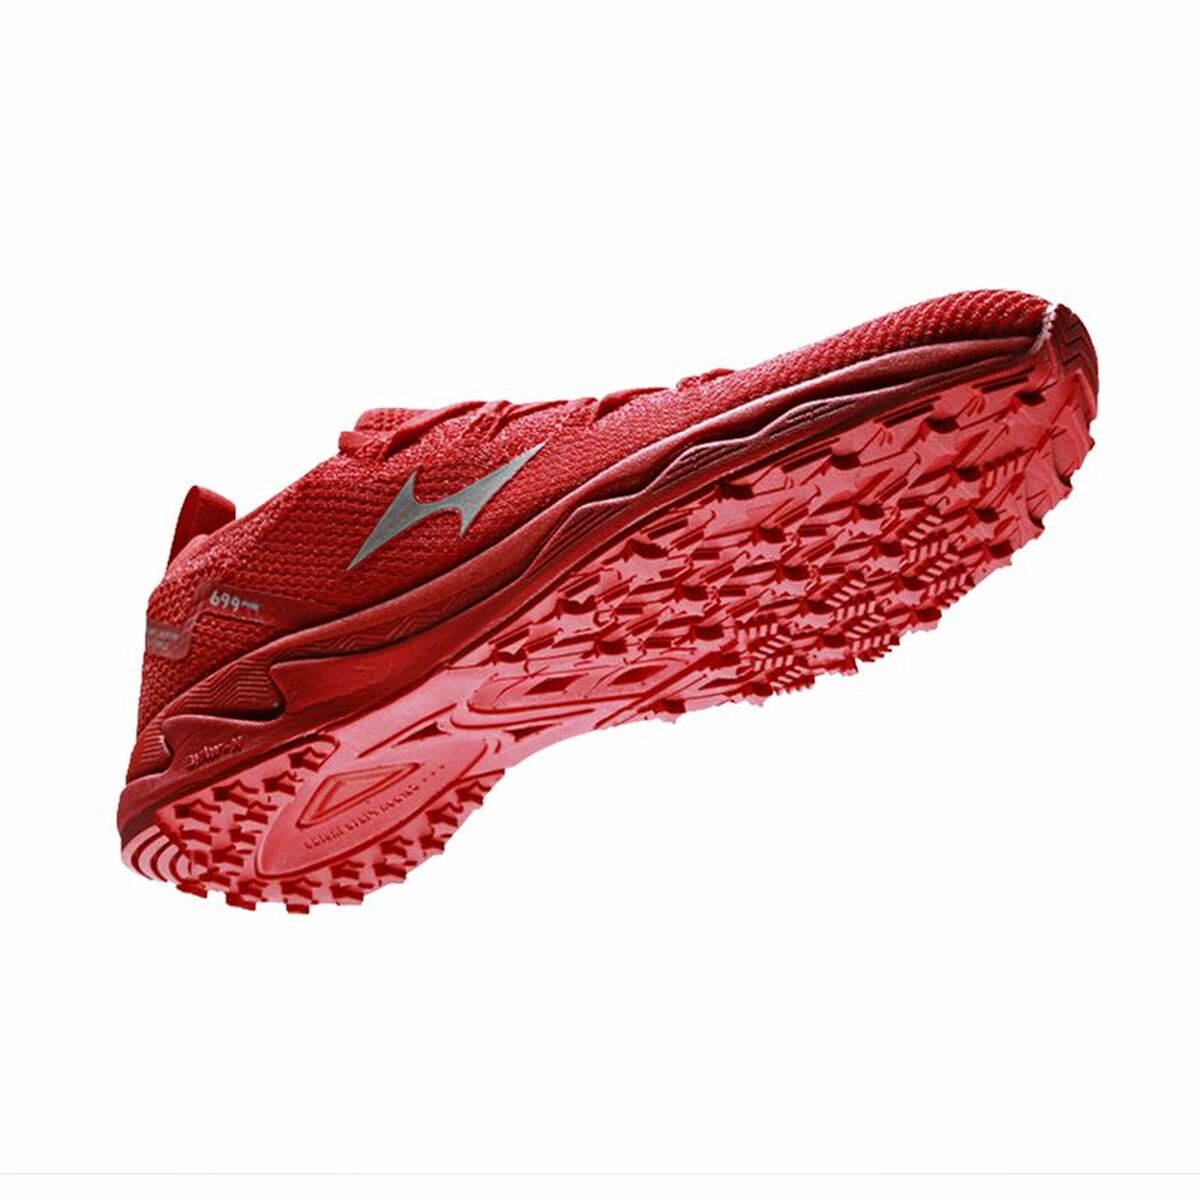 Chaussures de Running pour Adultes Health 699PRO Rouge Homme